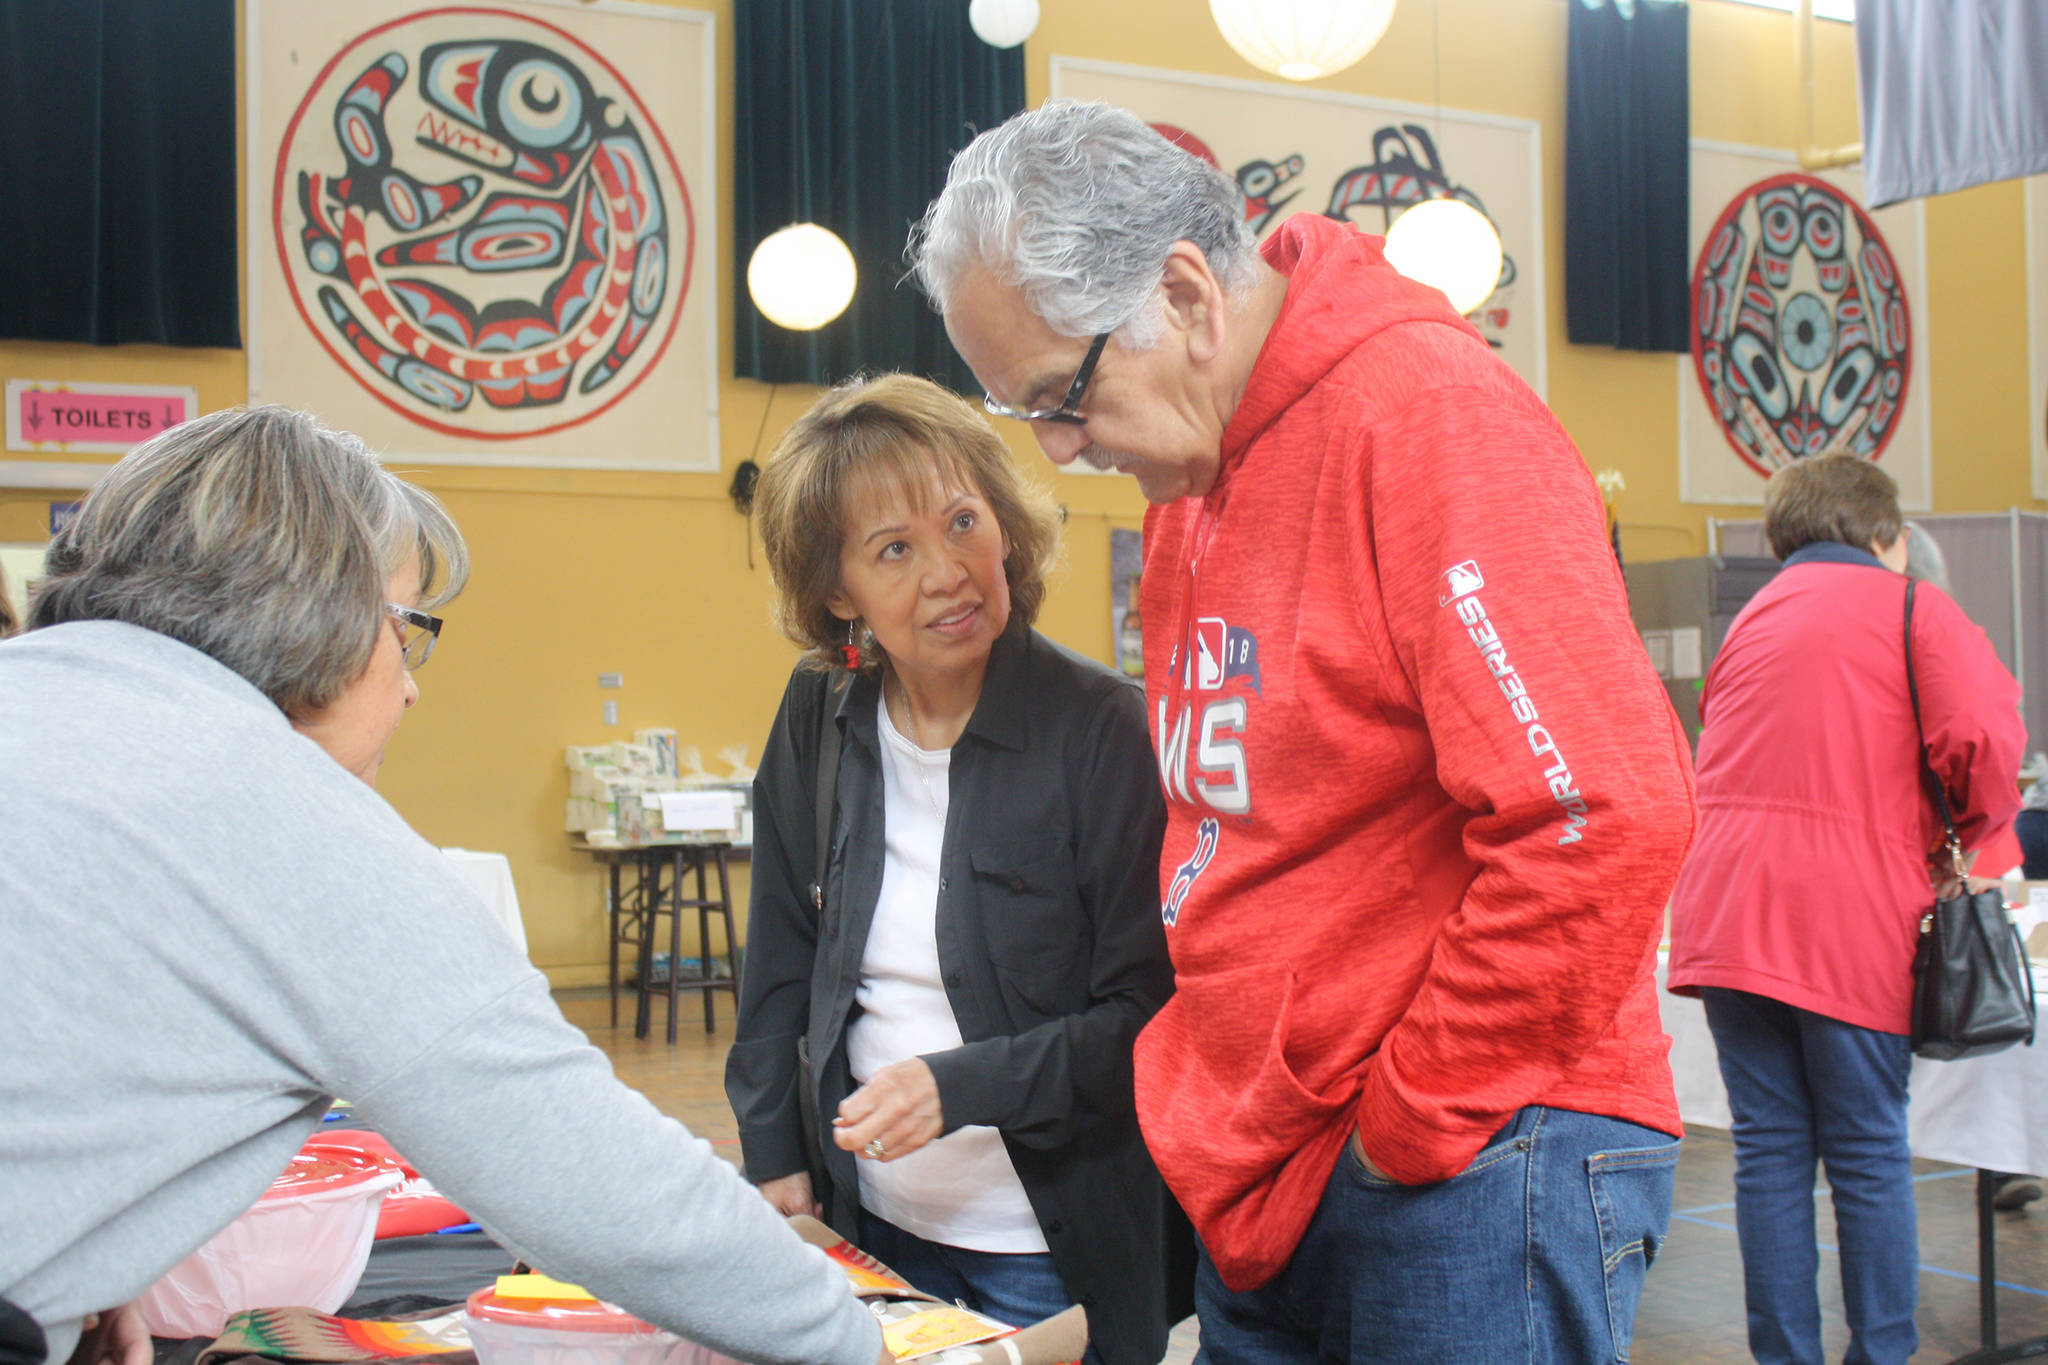 John and Kathy Lawrence look at various raffles during a fundraiser for Alex Cesar at the Juneau Arts and Culture Center on Saturday, June 15, 2019. (Nolin Ainsworth | Juneau Empire)